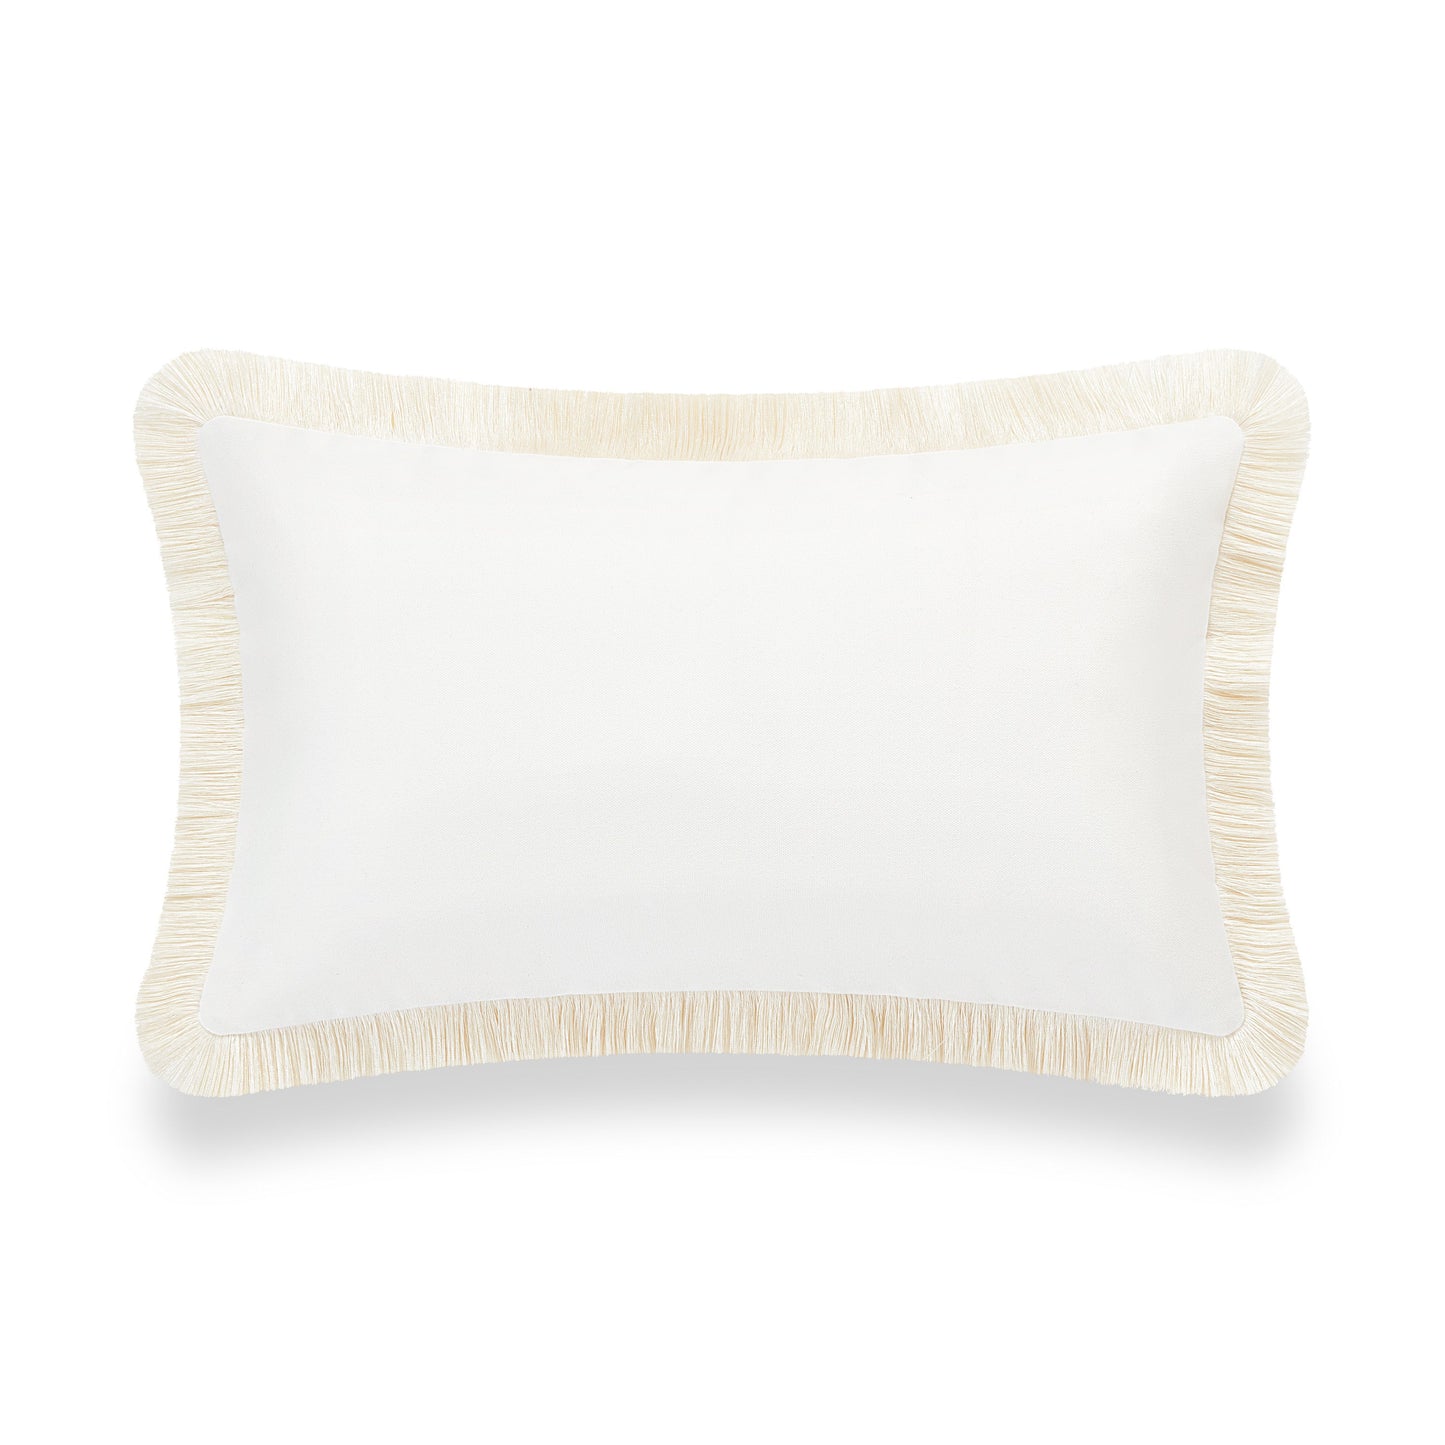 Coastal Indoor Outdoor Lumbar Pillow Cover, Fringe, Solid White, 12"x20"-4